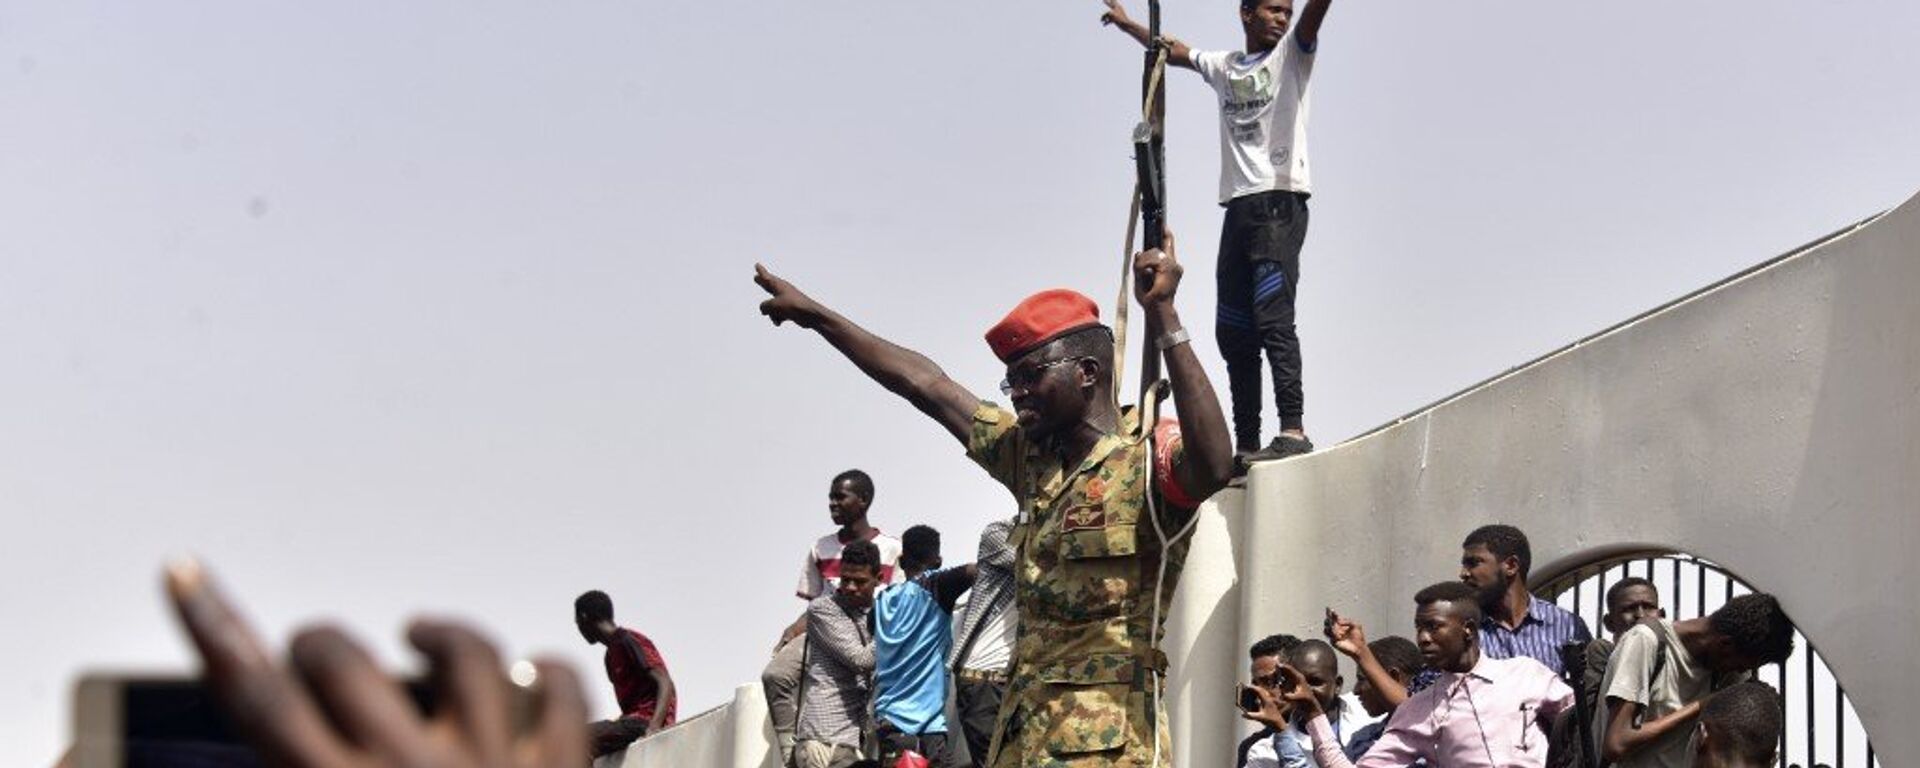 Members of the Sudanese military gather in a street in central Khartoum on April 11, 2019, after one of Africa's longest-serving presidents was toppled by the army. - Sputnik Afrique, 1920, 20.05.2019